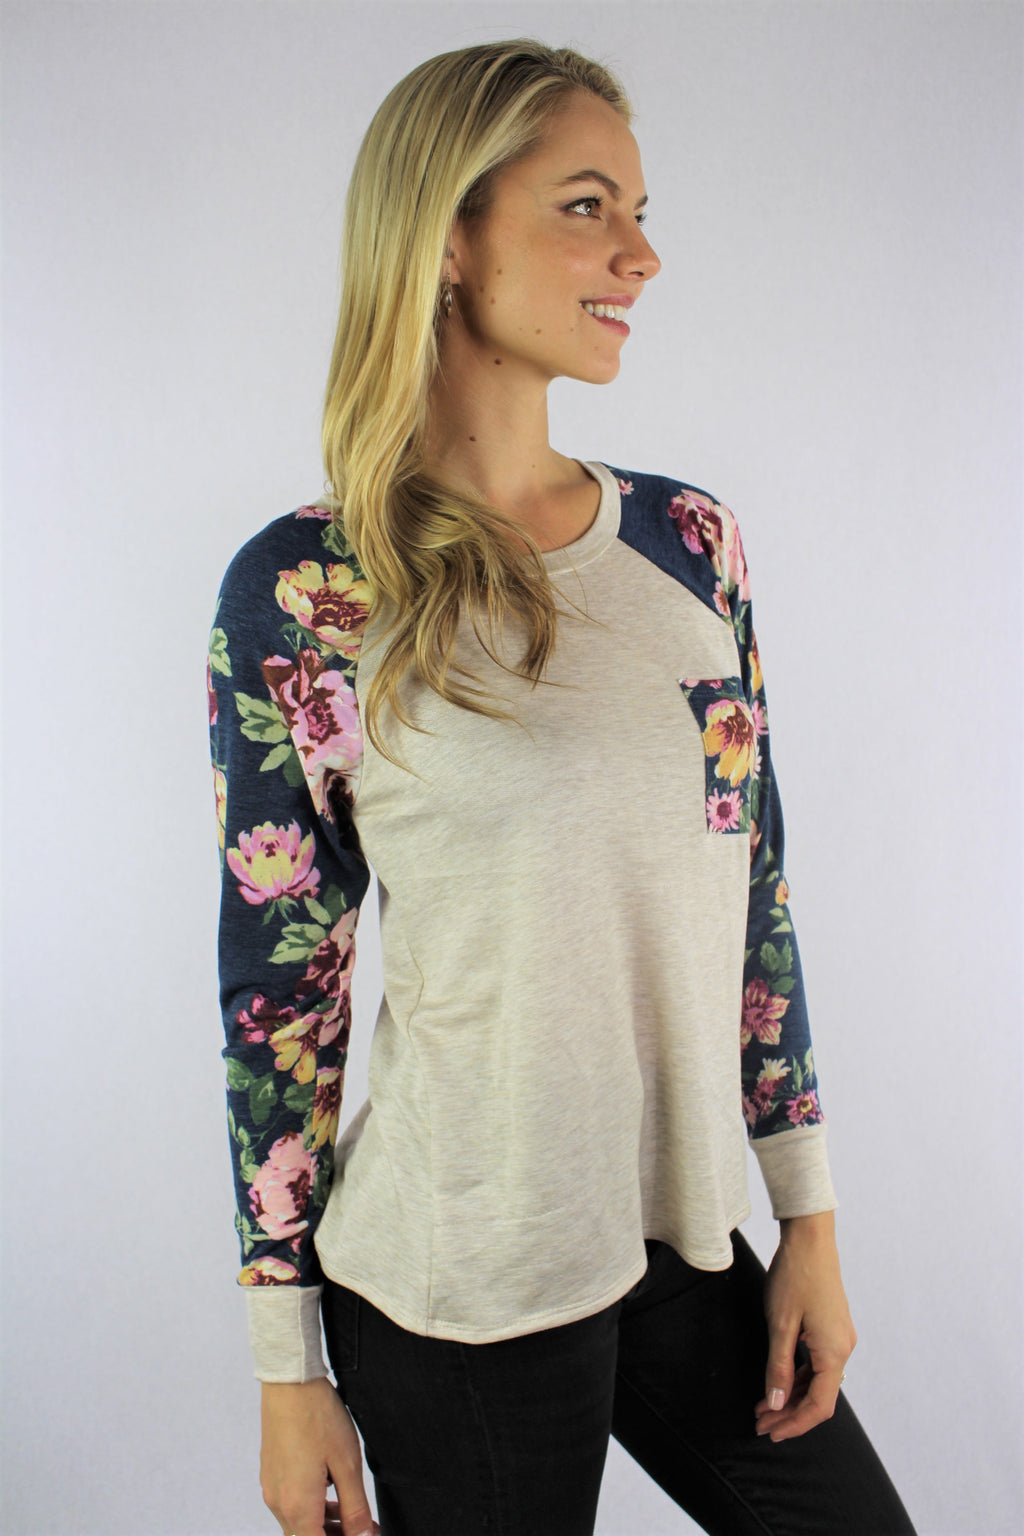 Buy Wholesale Made in USA Women's Apparel at Good Stuff Apparel